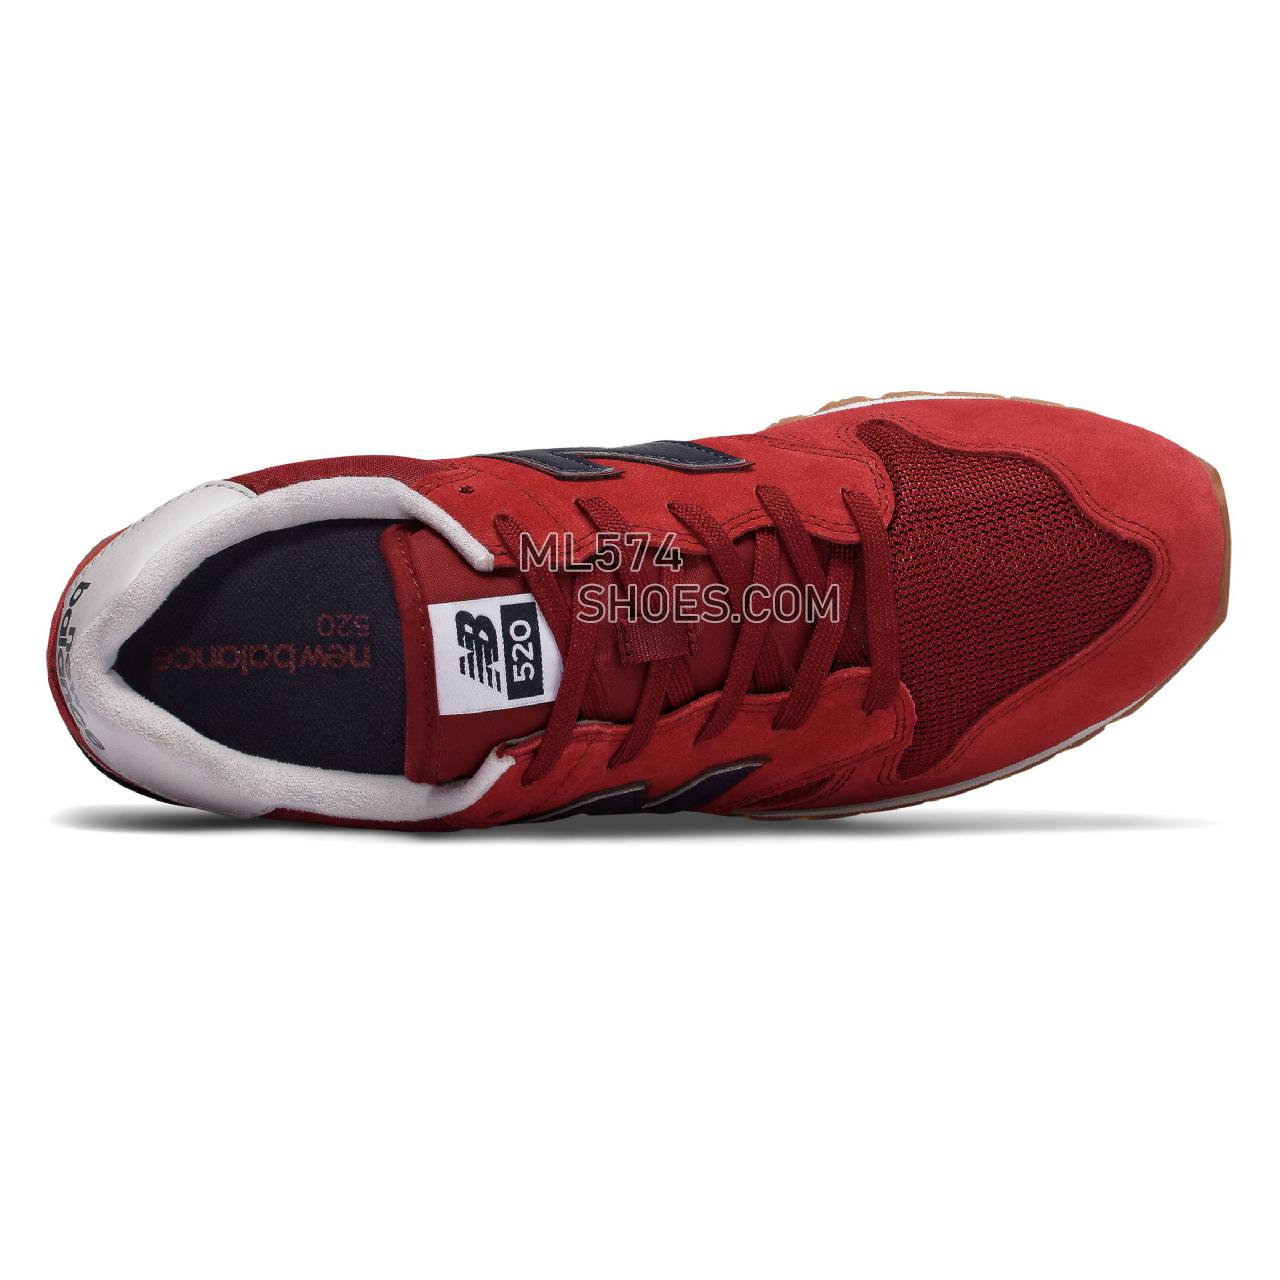 New Balance 520 - Unisex 520 - Classic Scarlet with Outerspace - U520EK